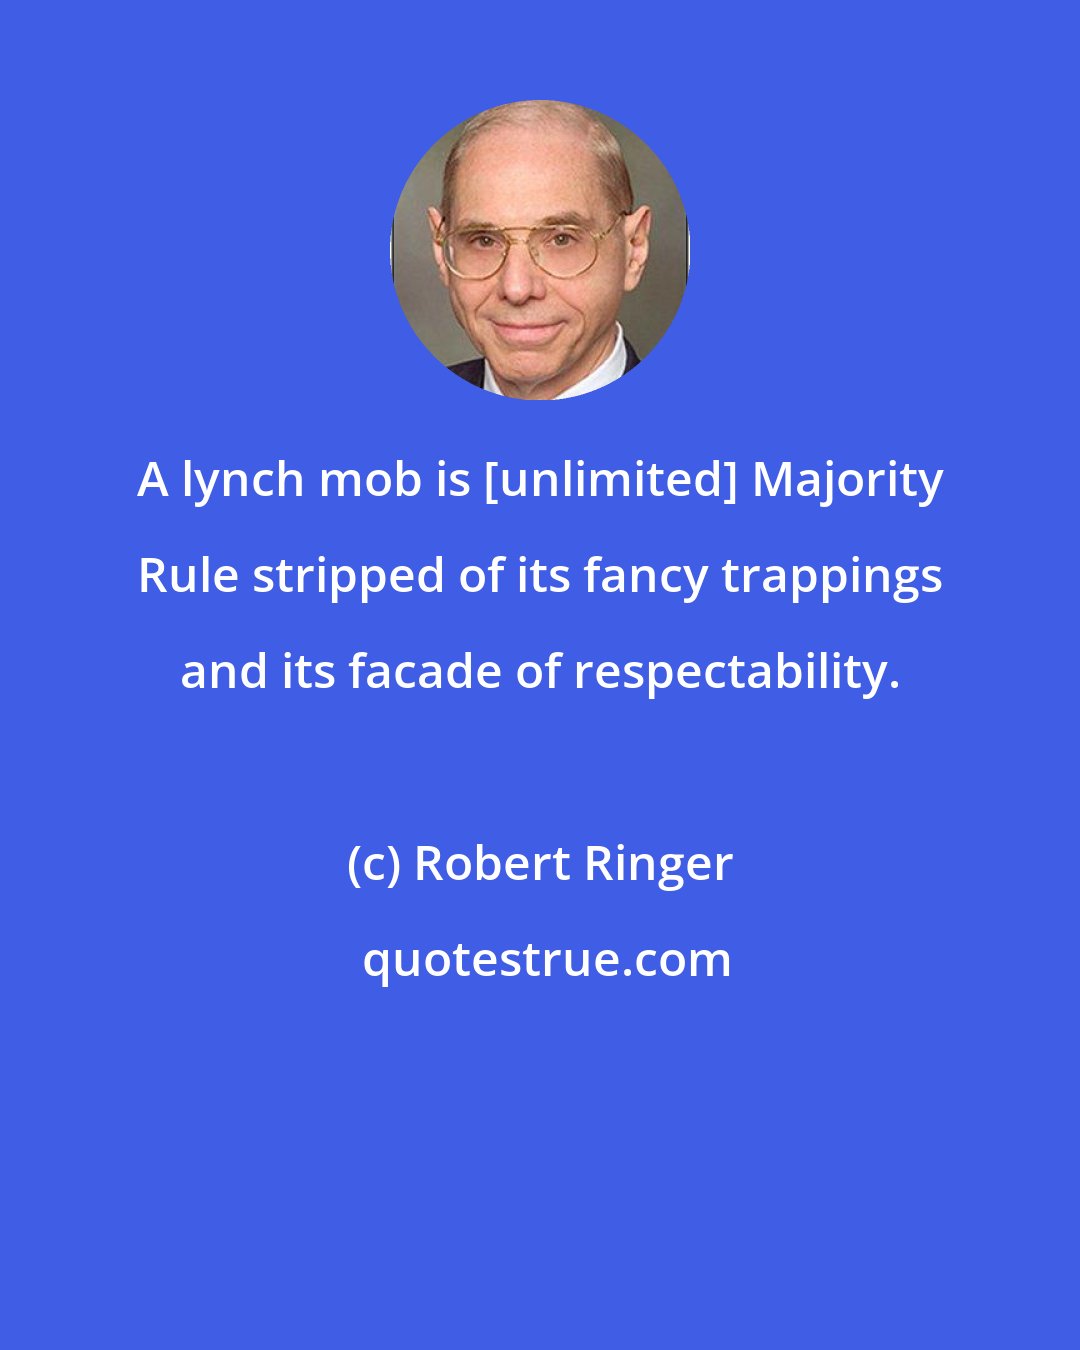 Robert Ringer: A lynch mob is [unlimited] Majority Rule stripped of its fancy trappings and its facade of respectability.